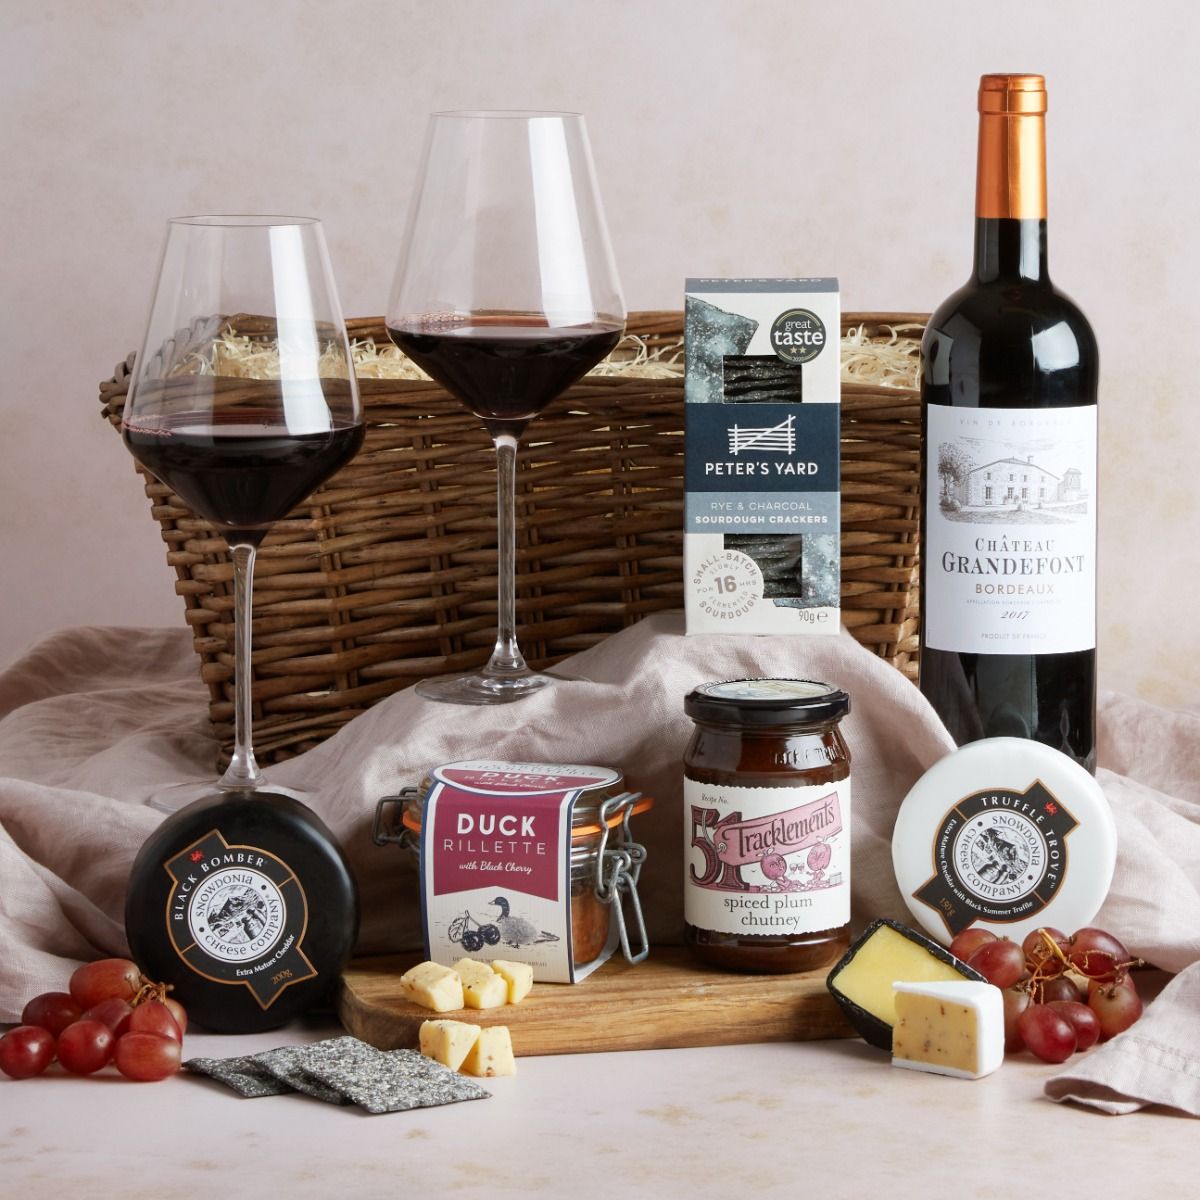 The Wine, Truffle Cheese & Duck Rillette gift set hamper with contents on display